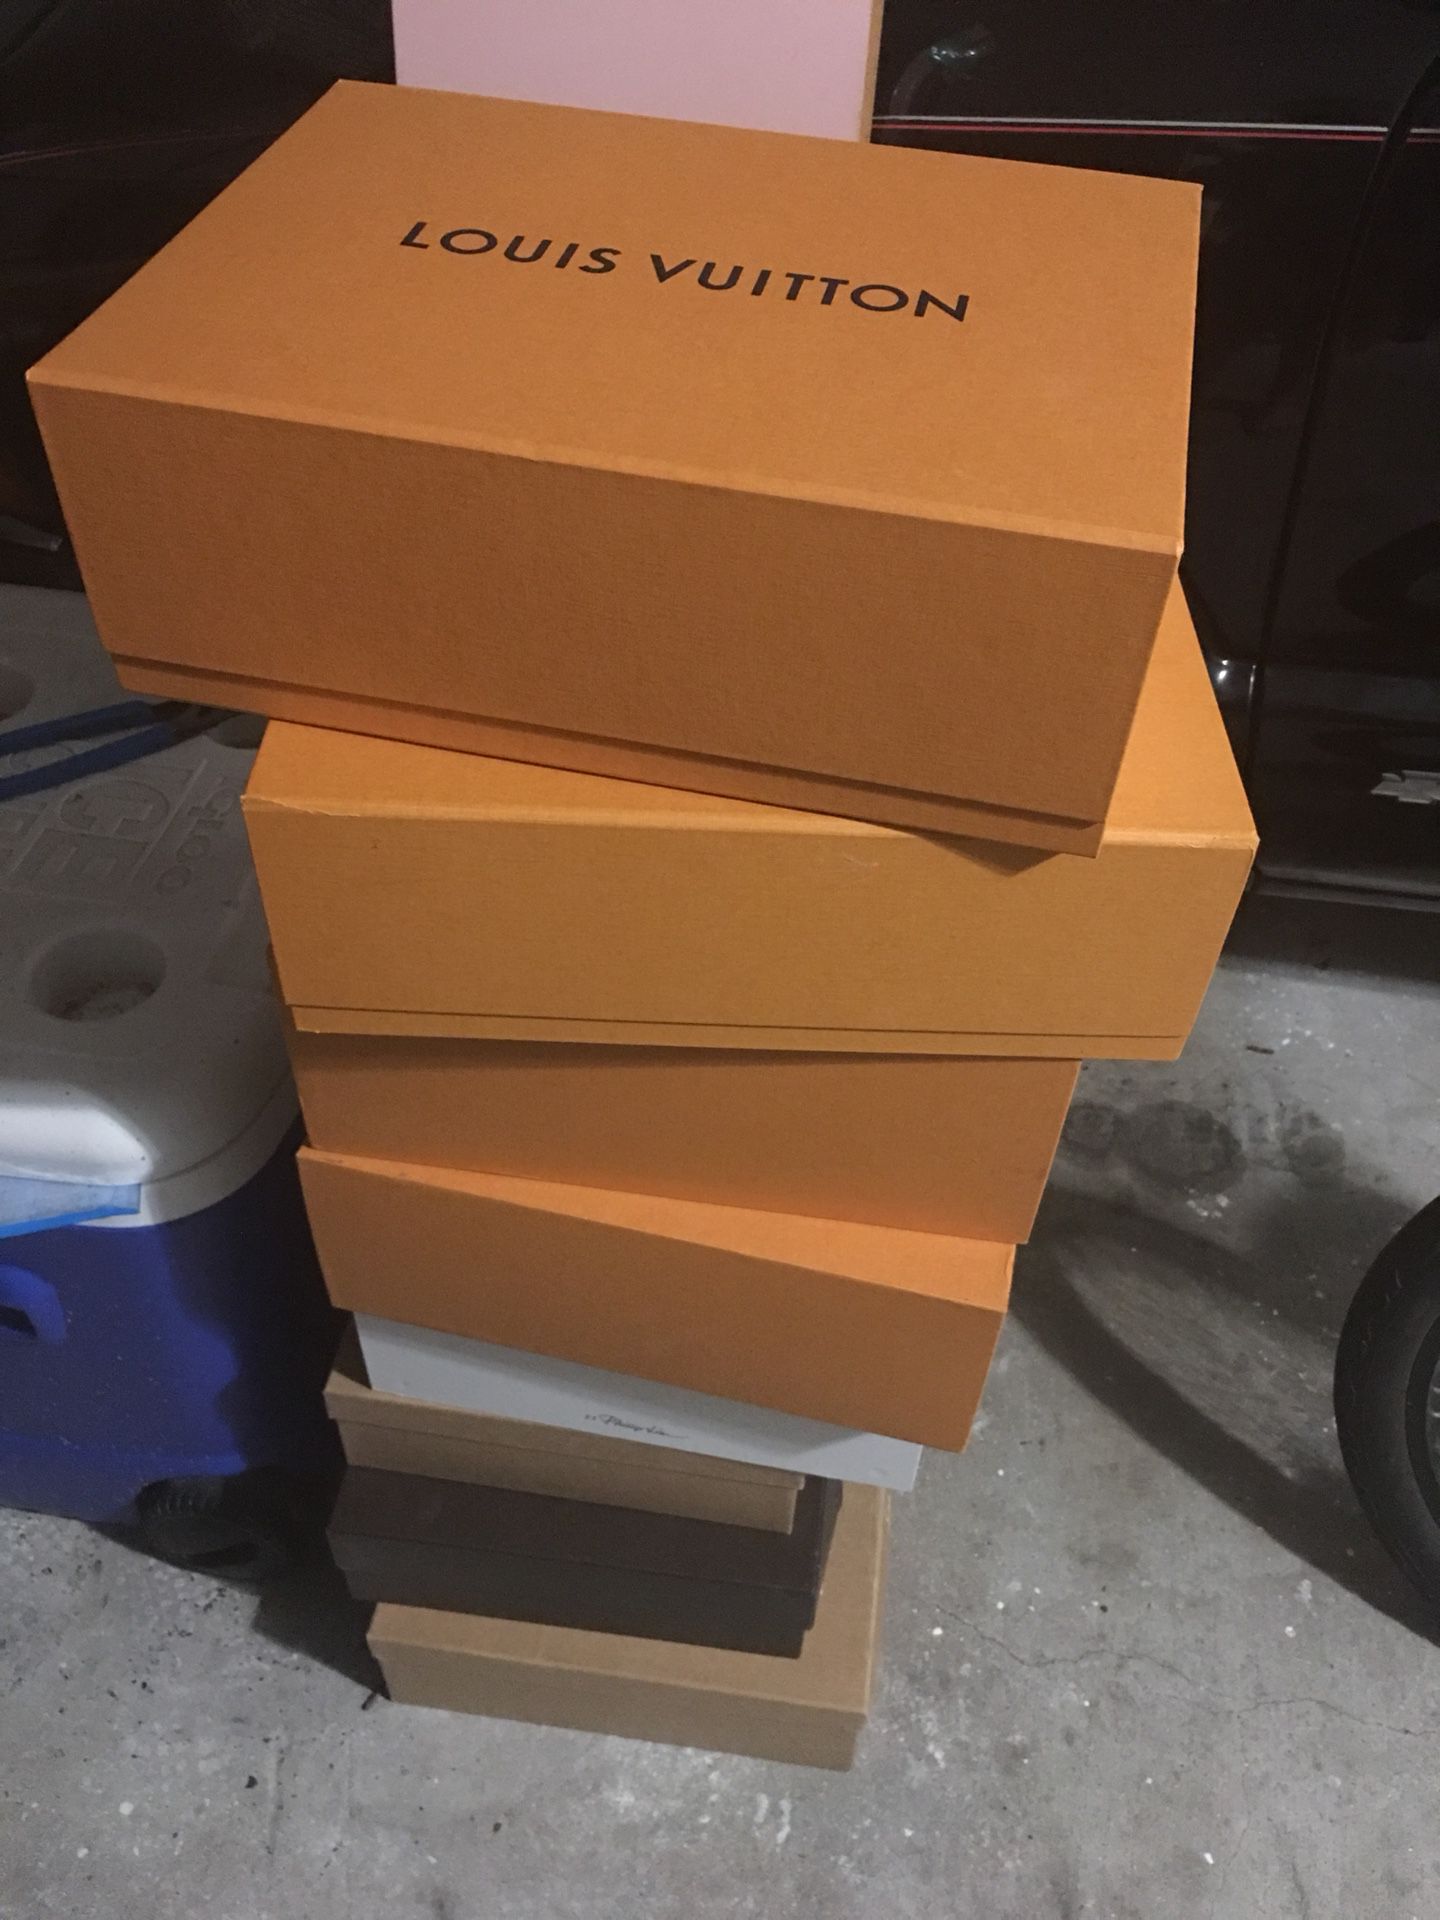 $40 for all Louis Vuitton Gucci Louboutin shoe boxes for Sale in Houston,  TX - OfferUp